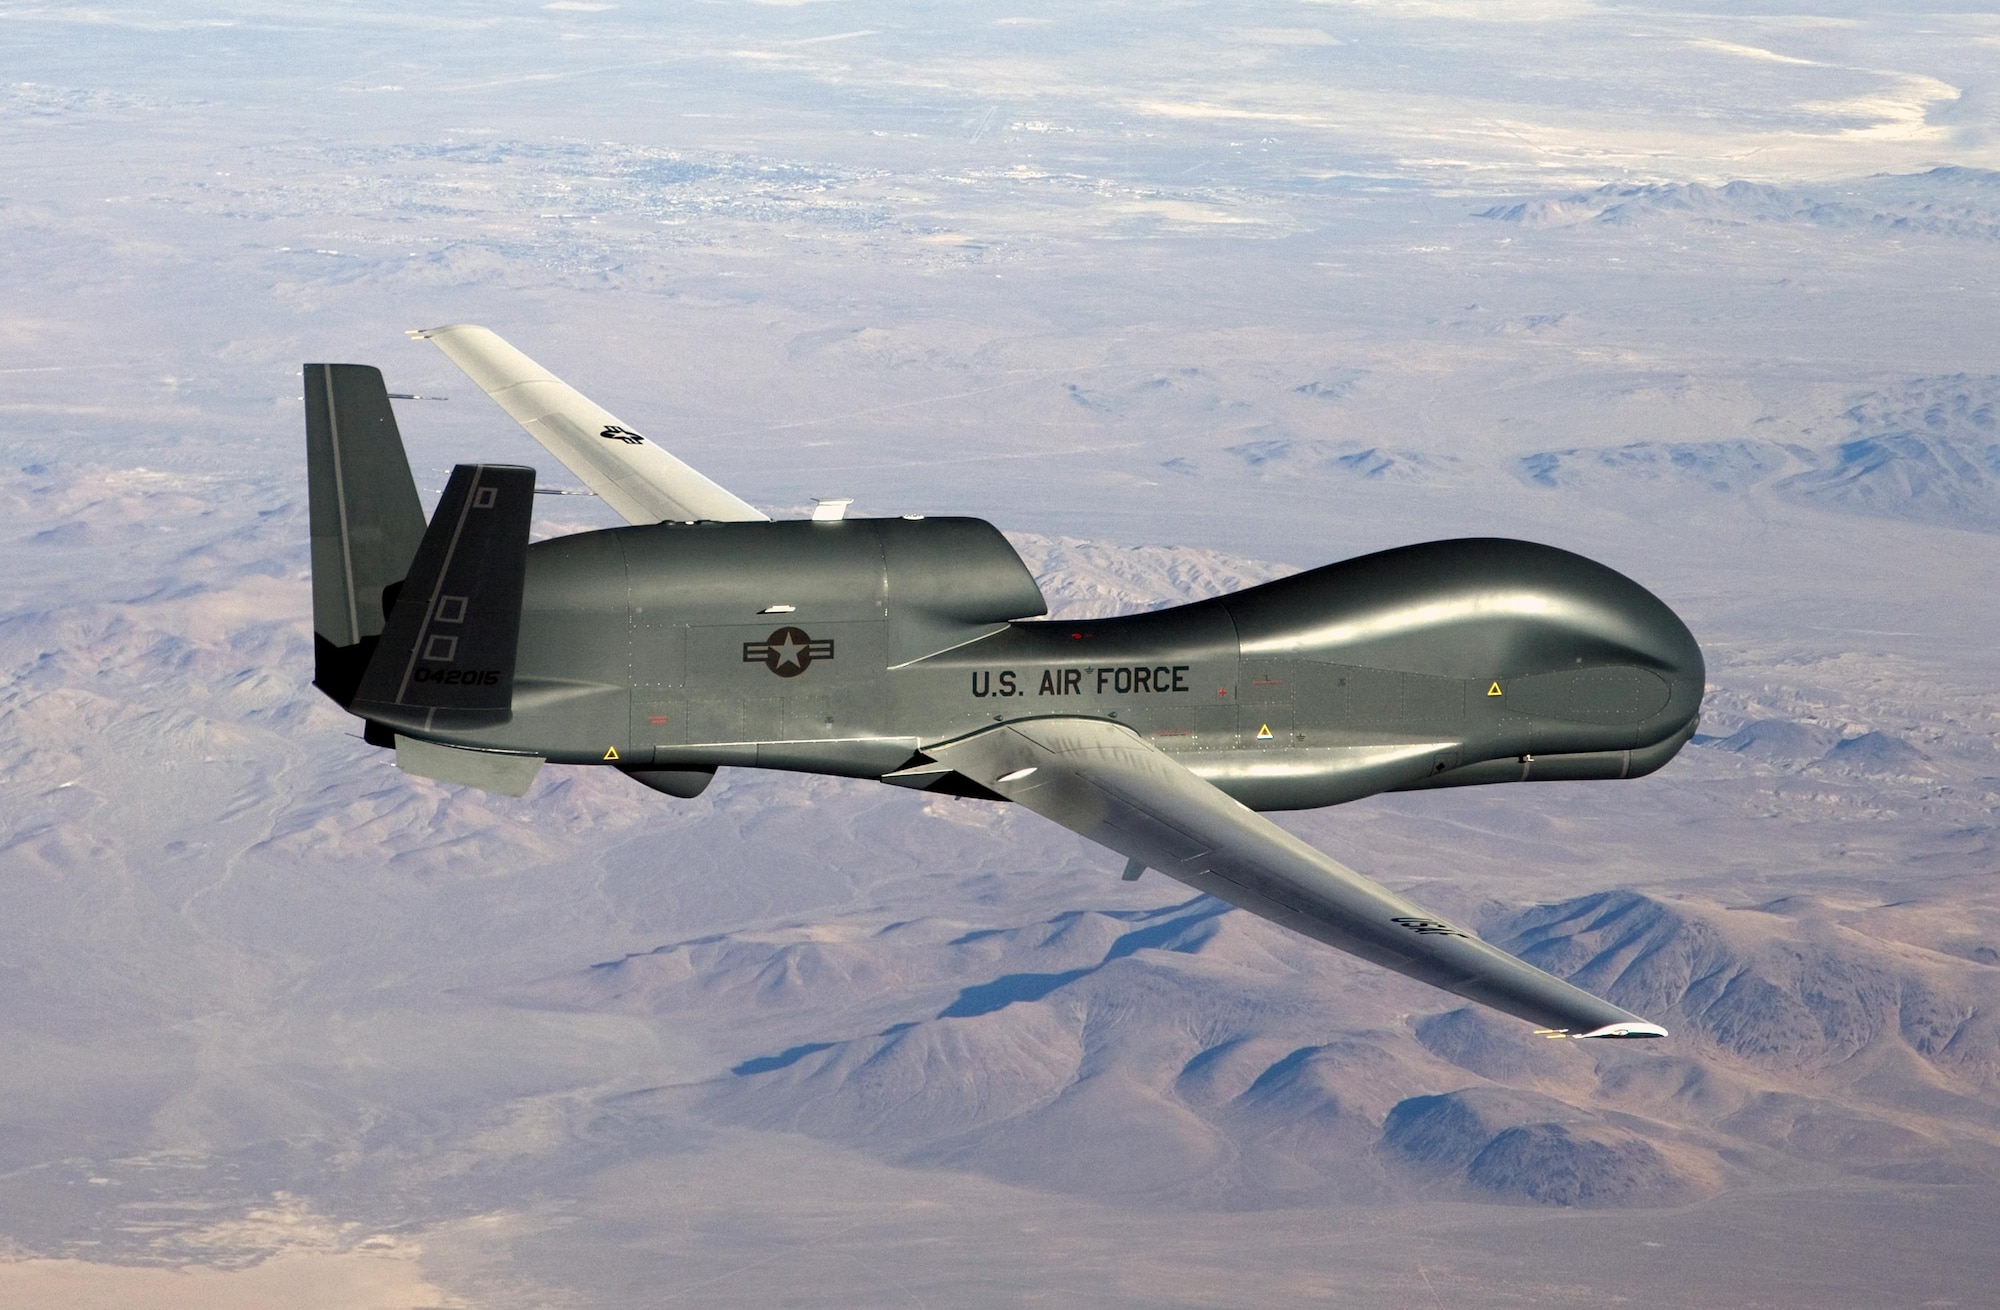 The RQ-4 Global Hawk is a high-altitude, long-endurance, remotely piloted aircraft with an integrated sensor suite that provides global all-weather, day or night intelligence, surveillance and reconnaissance (ISR) capability. (U.S. Air Force photo/Bobbi Zapka)